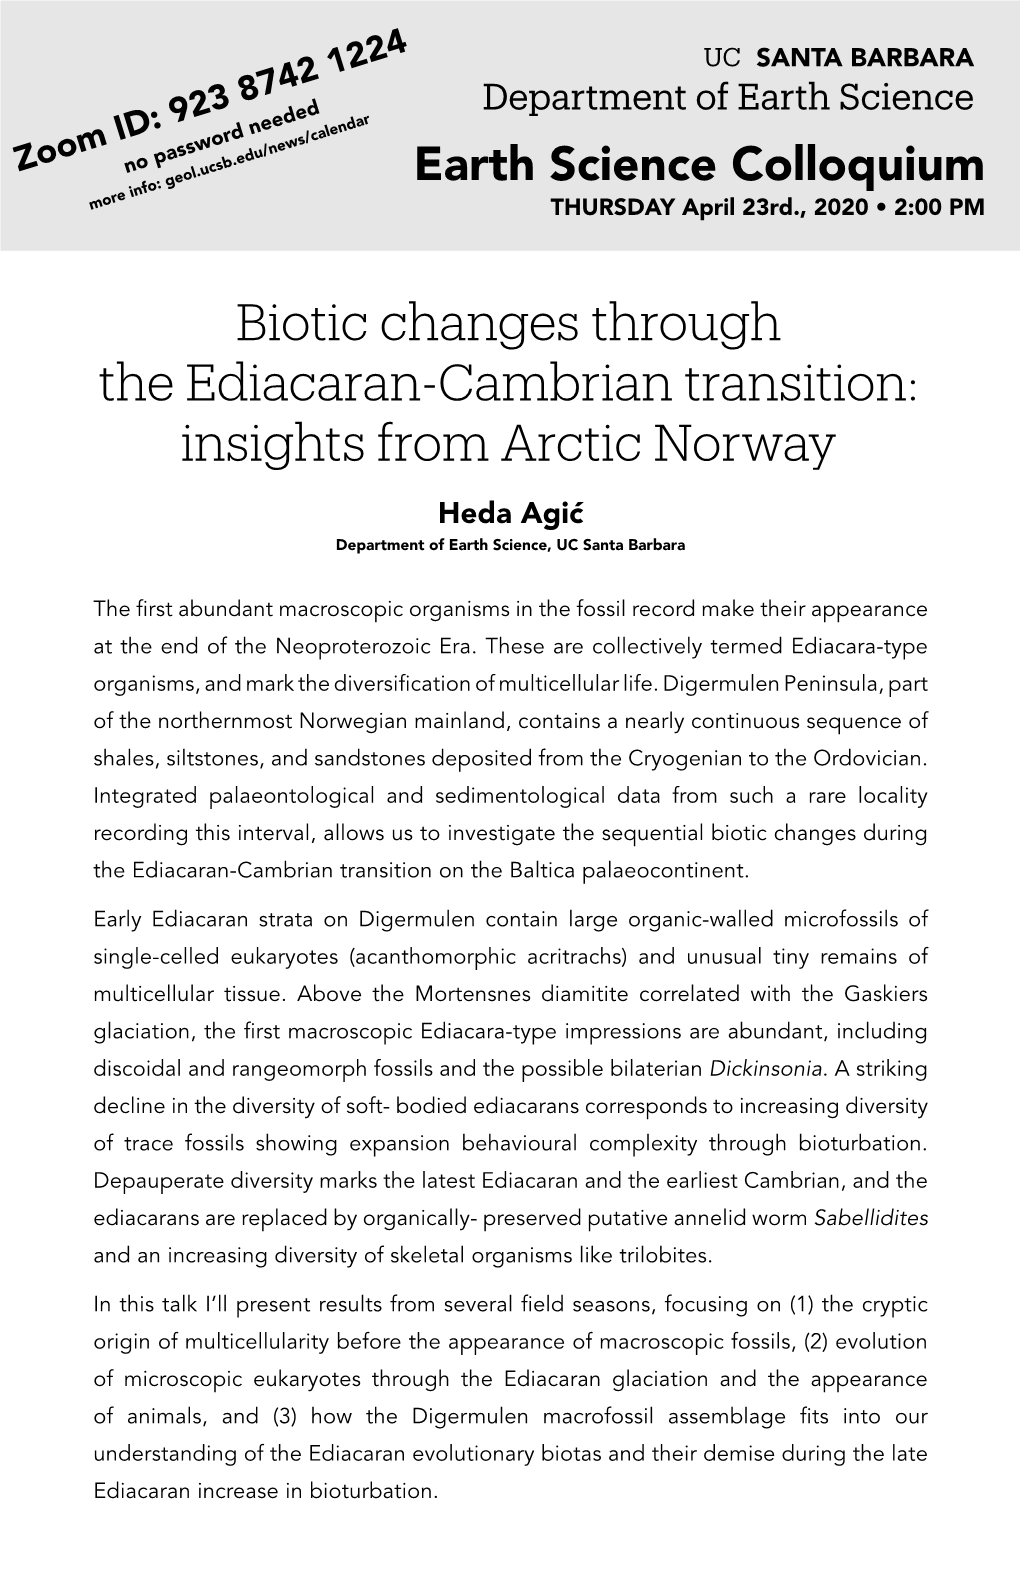 Biotic Changes Through the Ediacaran-Cambrian Transition: Insights from Arctic Norway